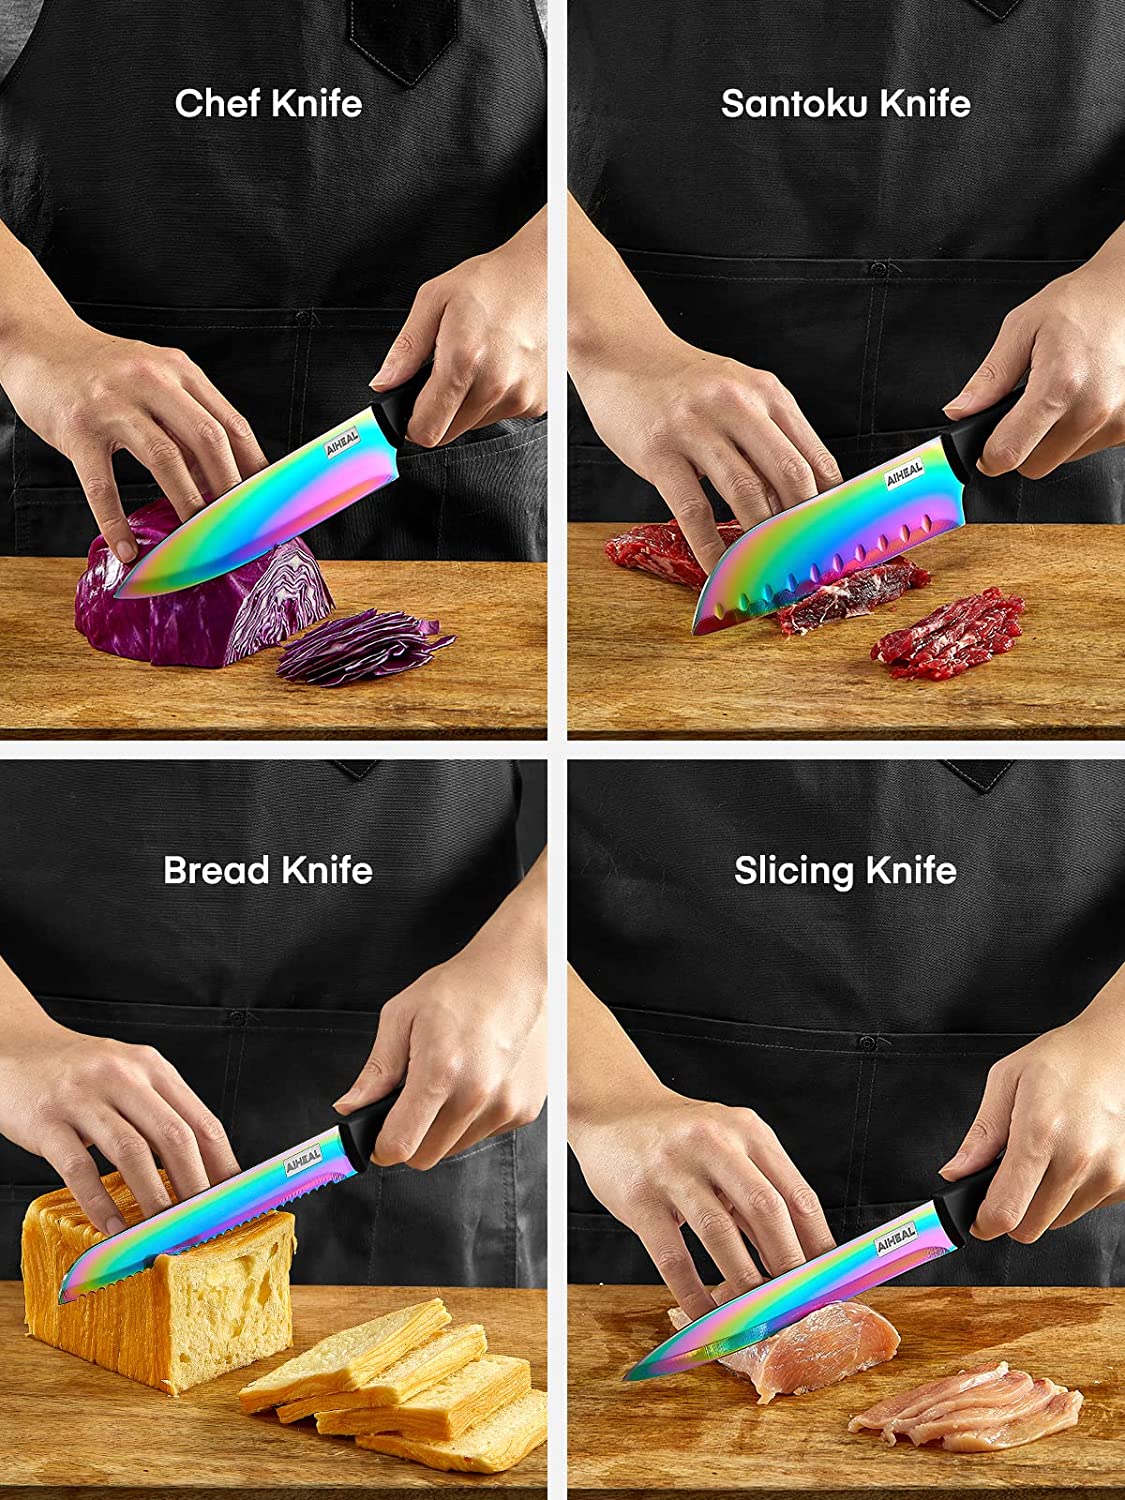 satisfy all you need, Aiheal Knife Set, 16 Pieces High Carbon Stainless Steel Rainbow Color Kitchen Knife Set, Titanium Coating Blade, No Rust and Super Sharp Cutlery Knife